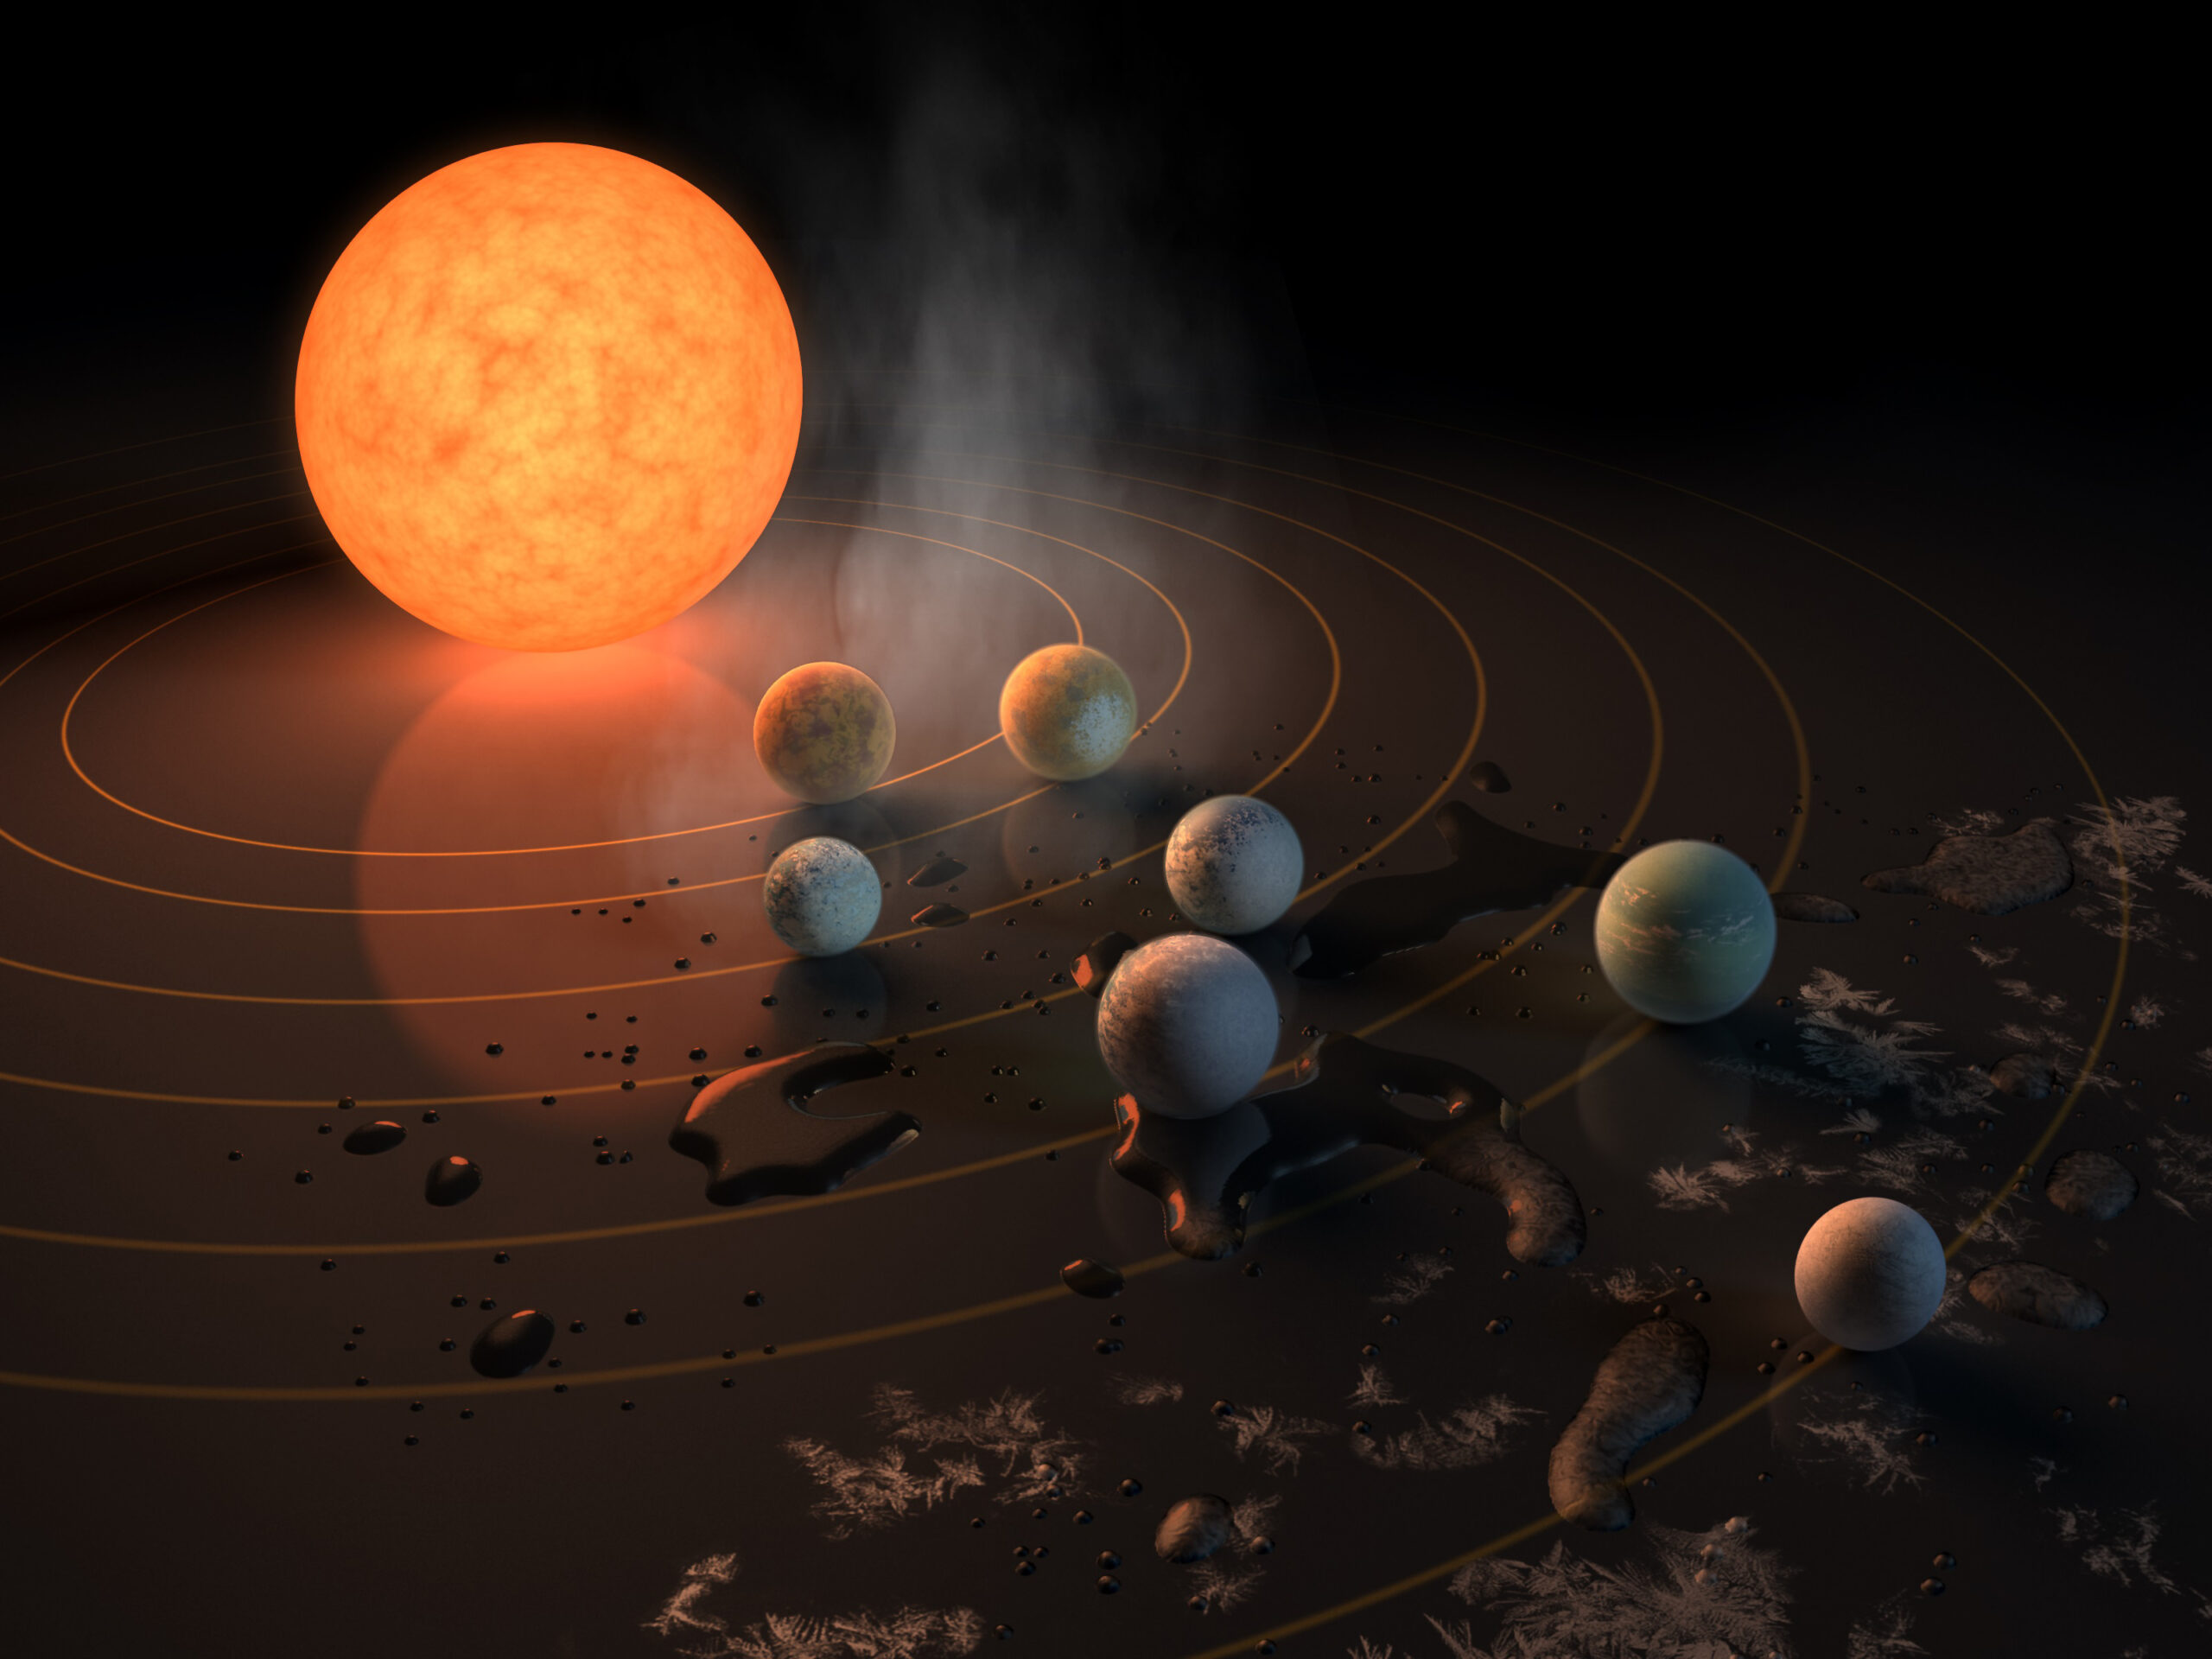 A whopping seven Earth-size planets were just found orbiting a nearby star